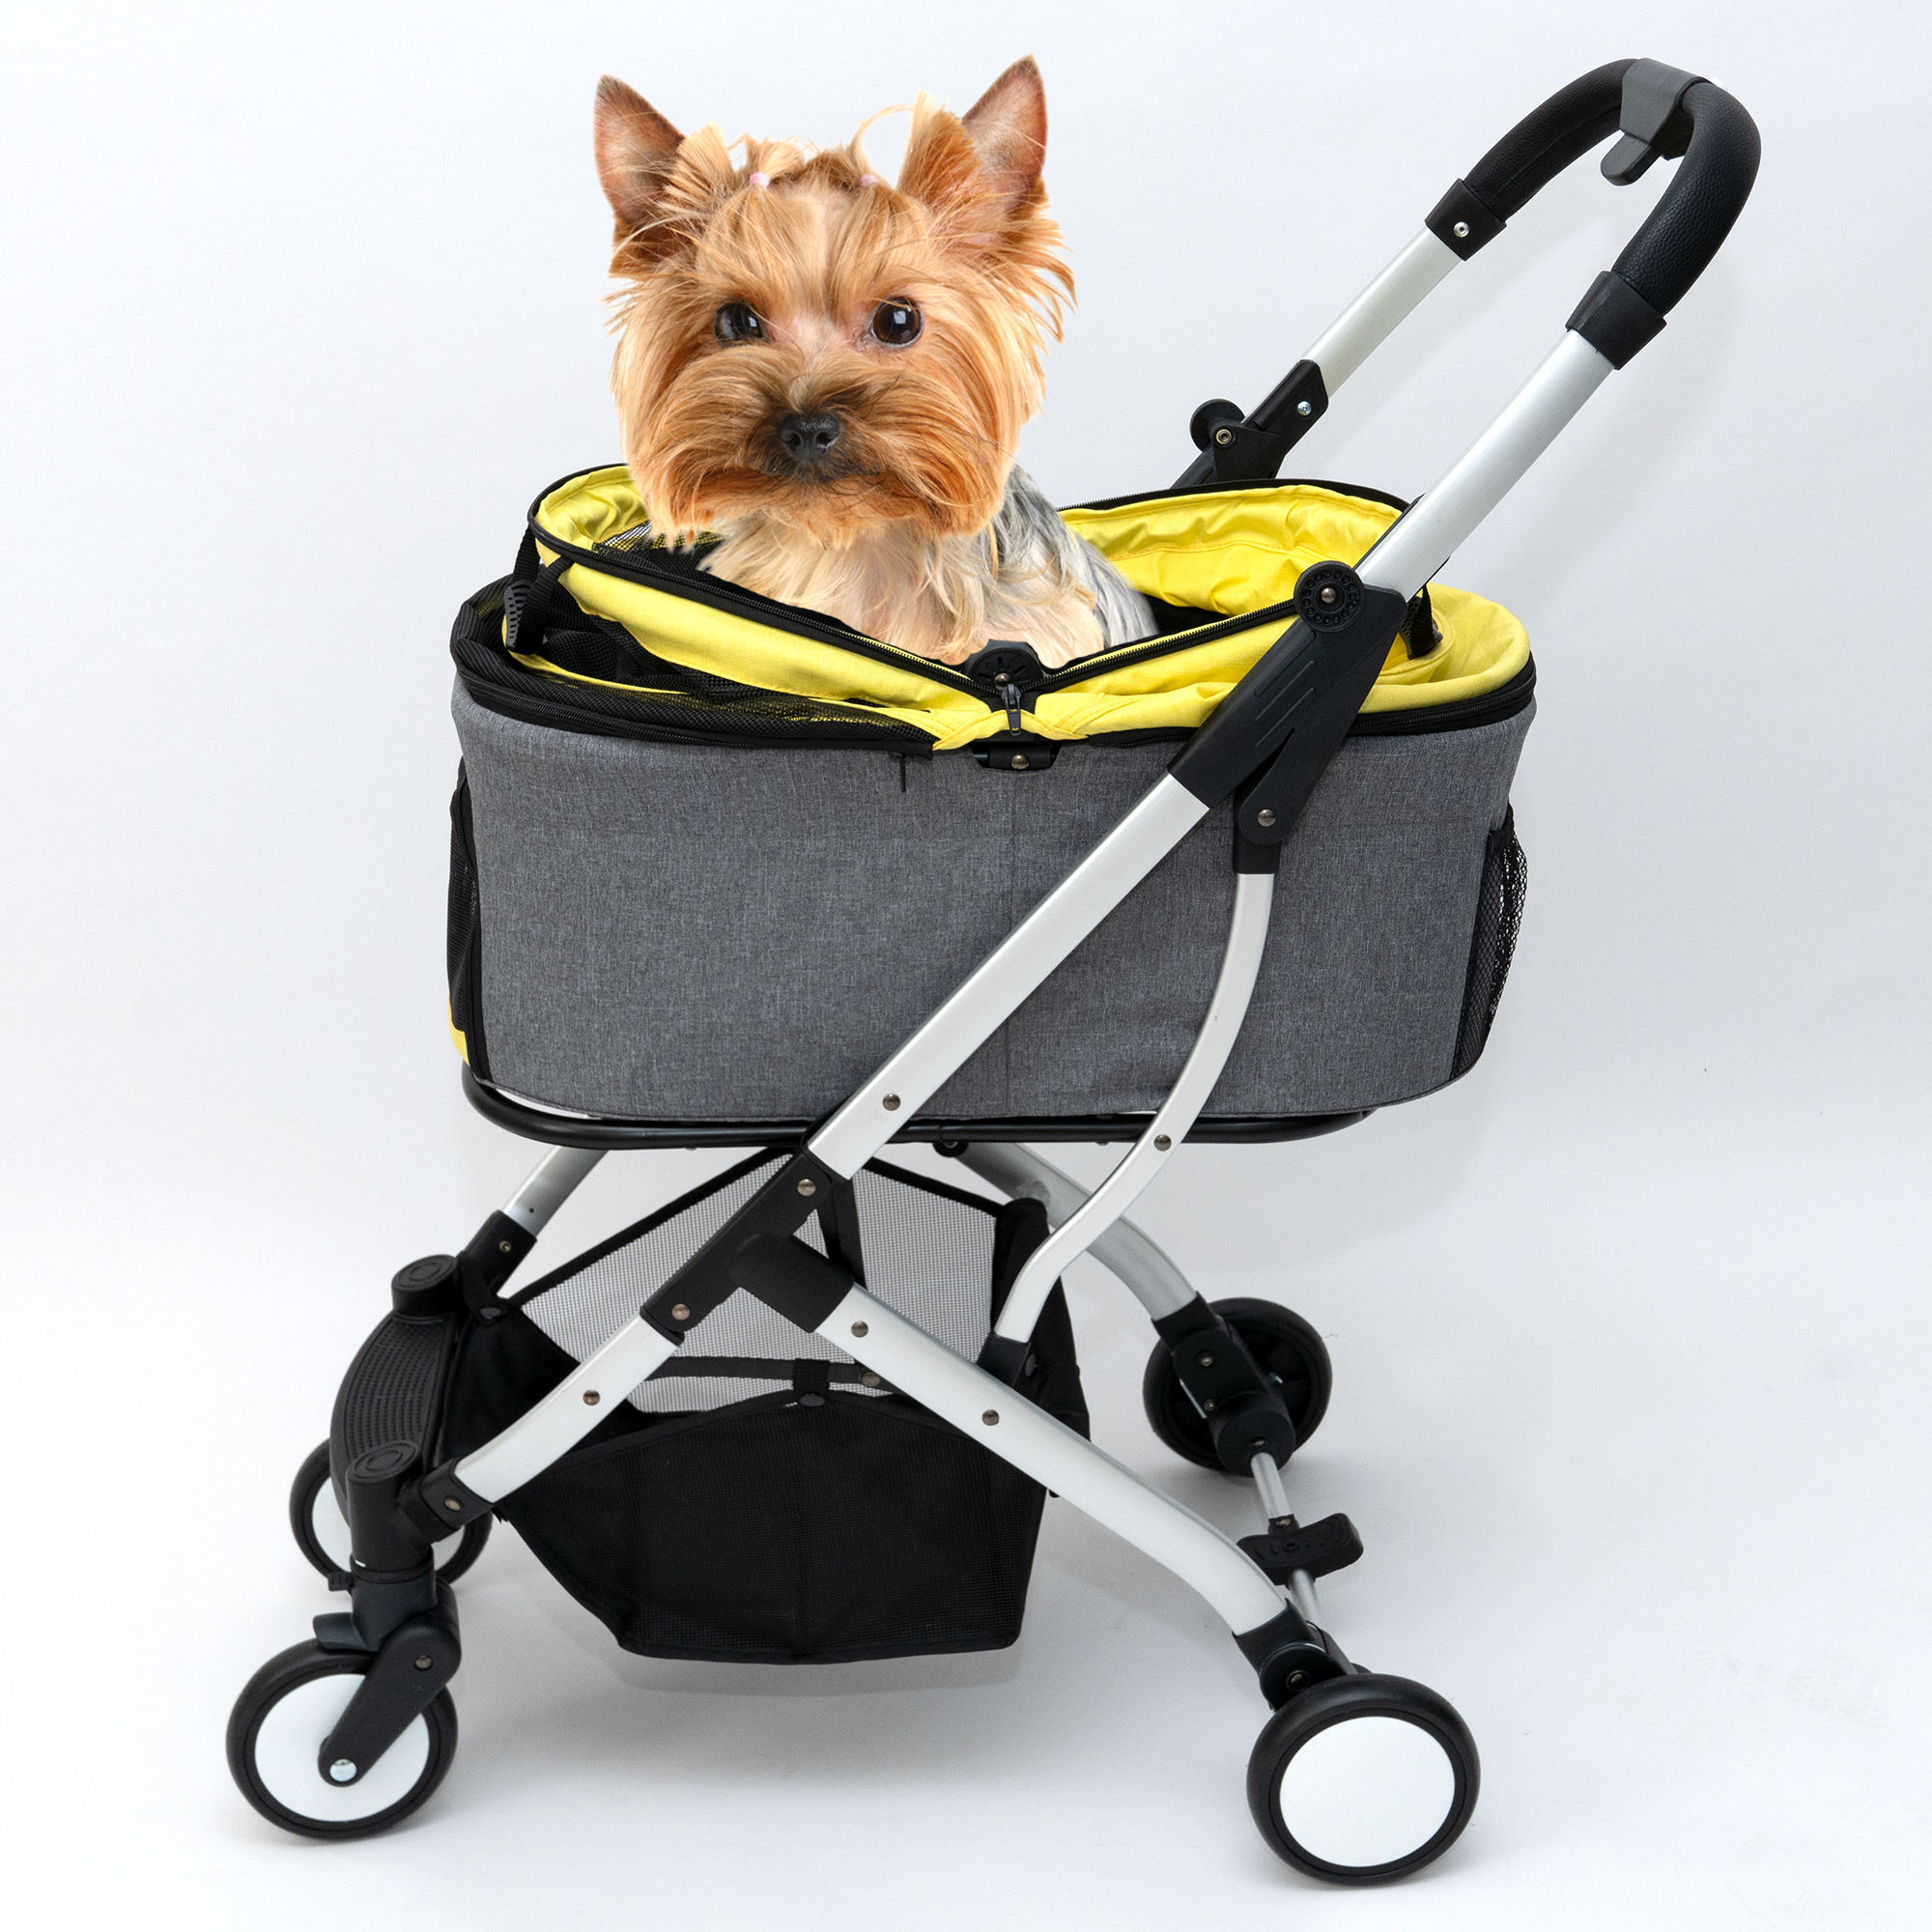 Multifunctional Durable Aluminum Alloy Light Weight One Key Foldable Pet Stroller